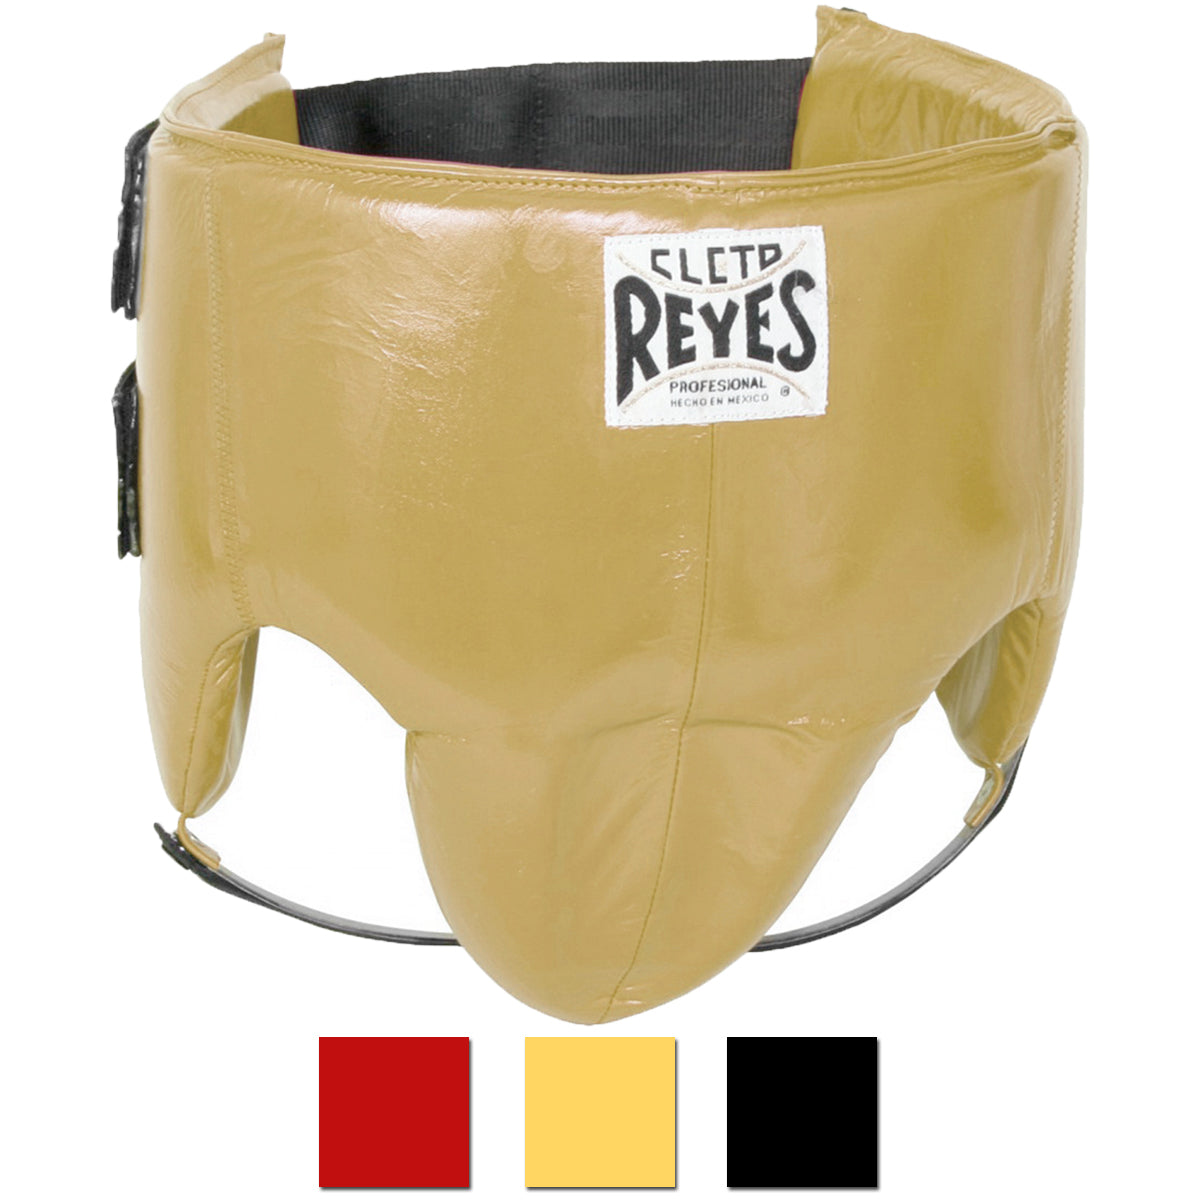 Cleto Reyes Kidney and Foul Padded Boxing Protective Cup Cleto Reyes